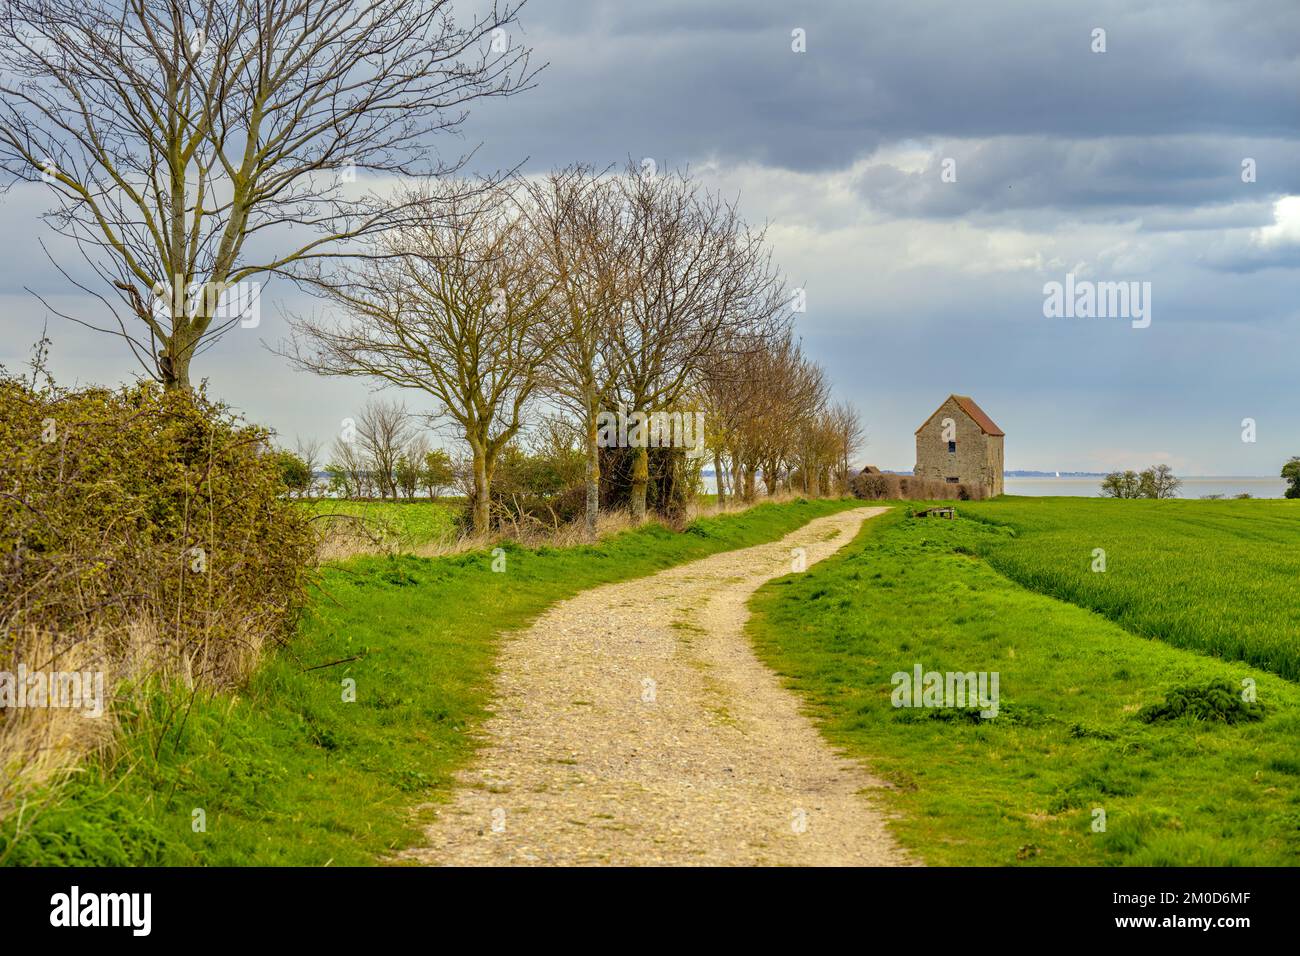 Chapel of St Peter-on-the-Wall Bradwell on sea the spatial home of The Othona Community Stock Photo